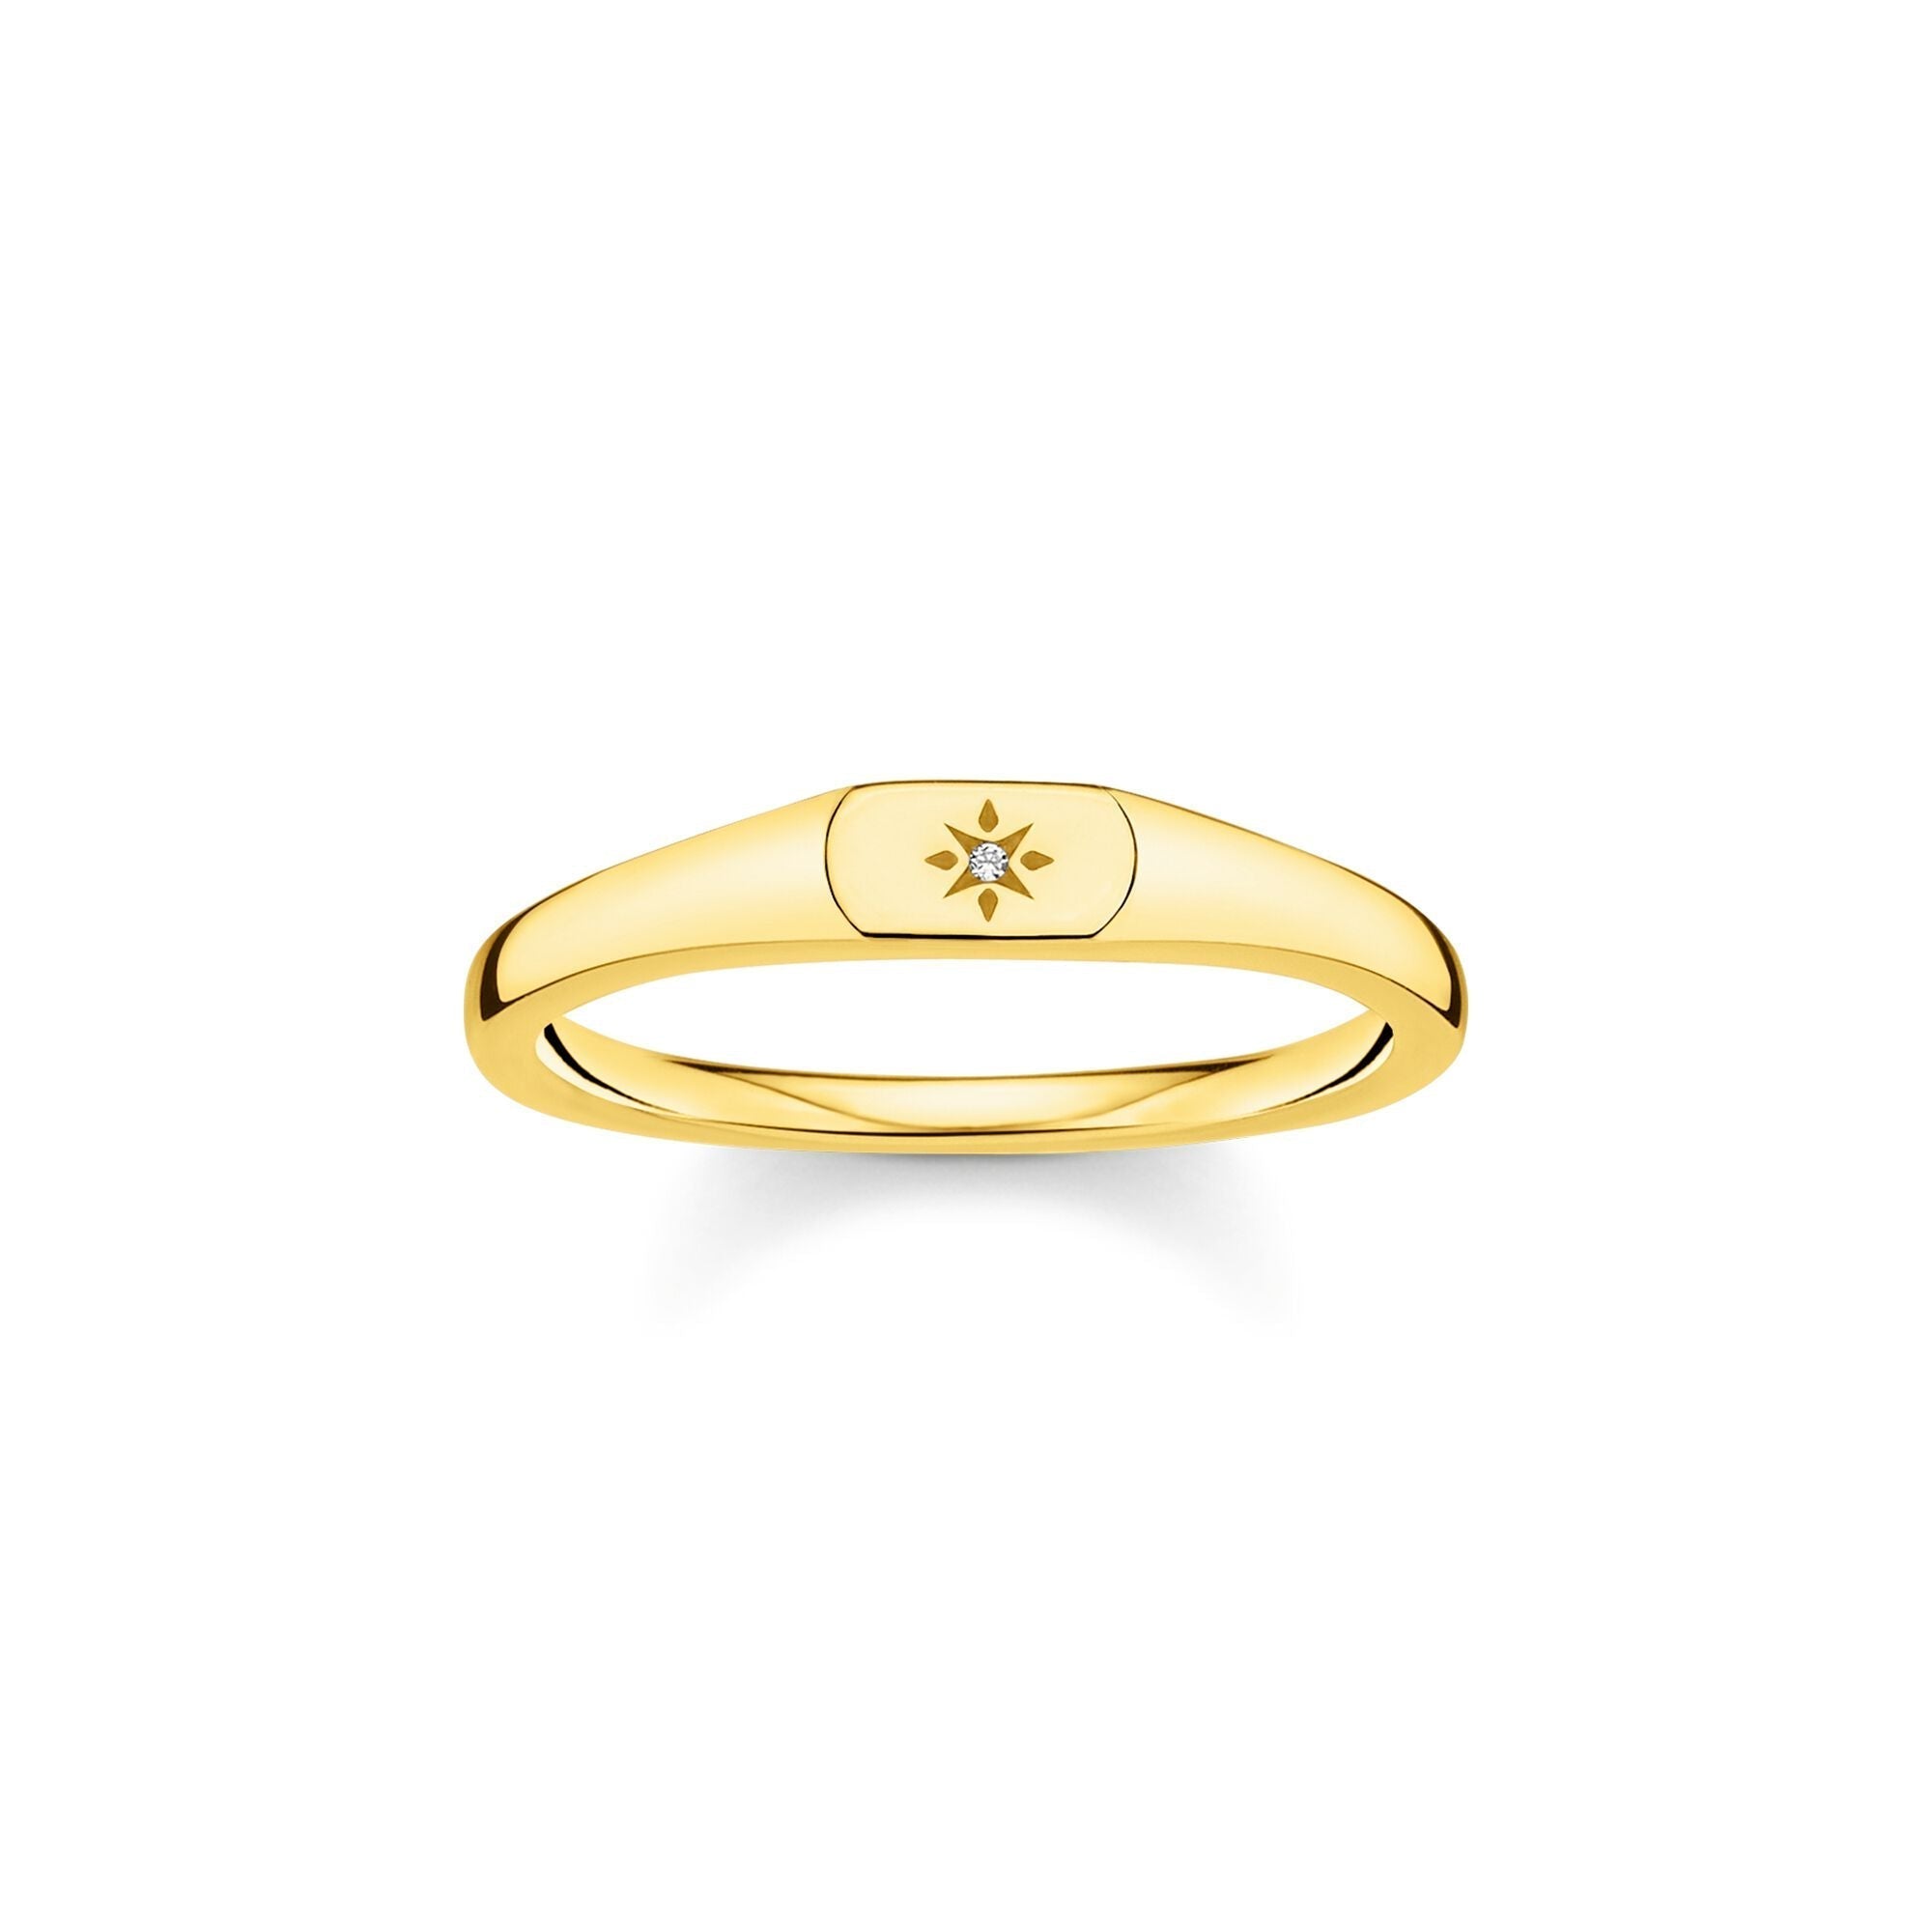 Thomas Sabo Charm Club Sterling Silver Yellow Gold Plated CZ Star Engraved Ring